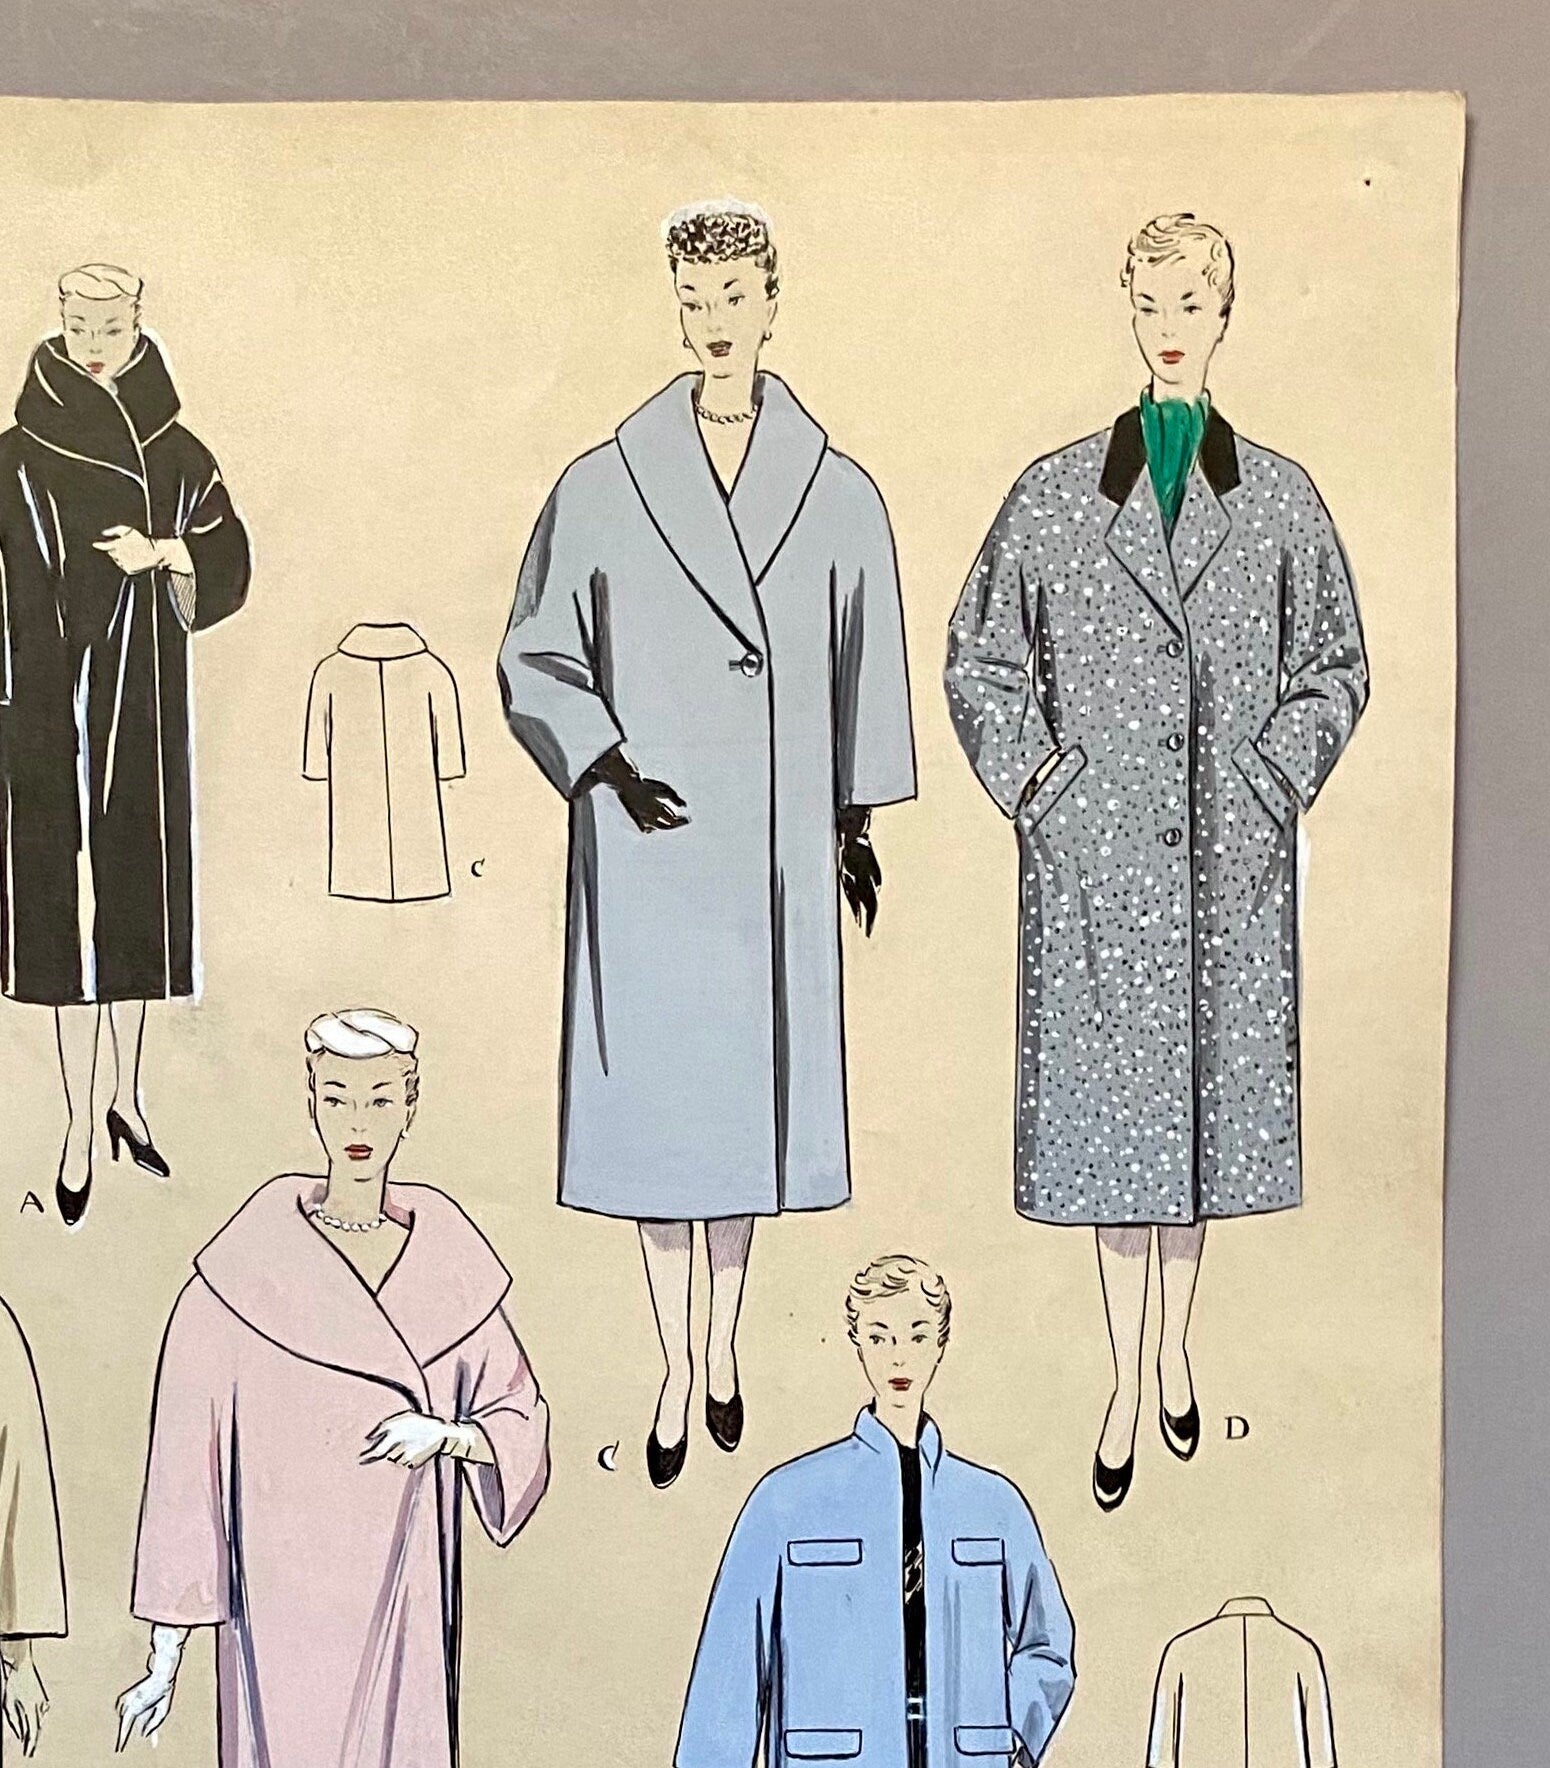 A Large Hand Drawn and Hand Painted Fashion Illustration. Featuring Coats. From Barcelona, Spain. 1954 -1955. Size: 50. 5 x 40.5 cms.